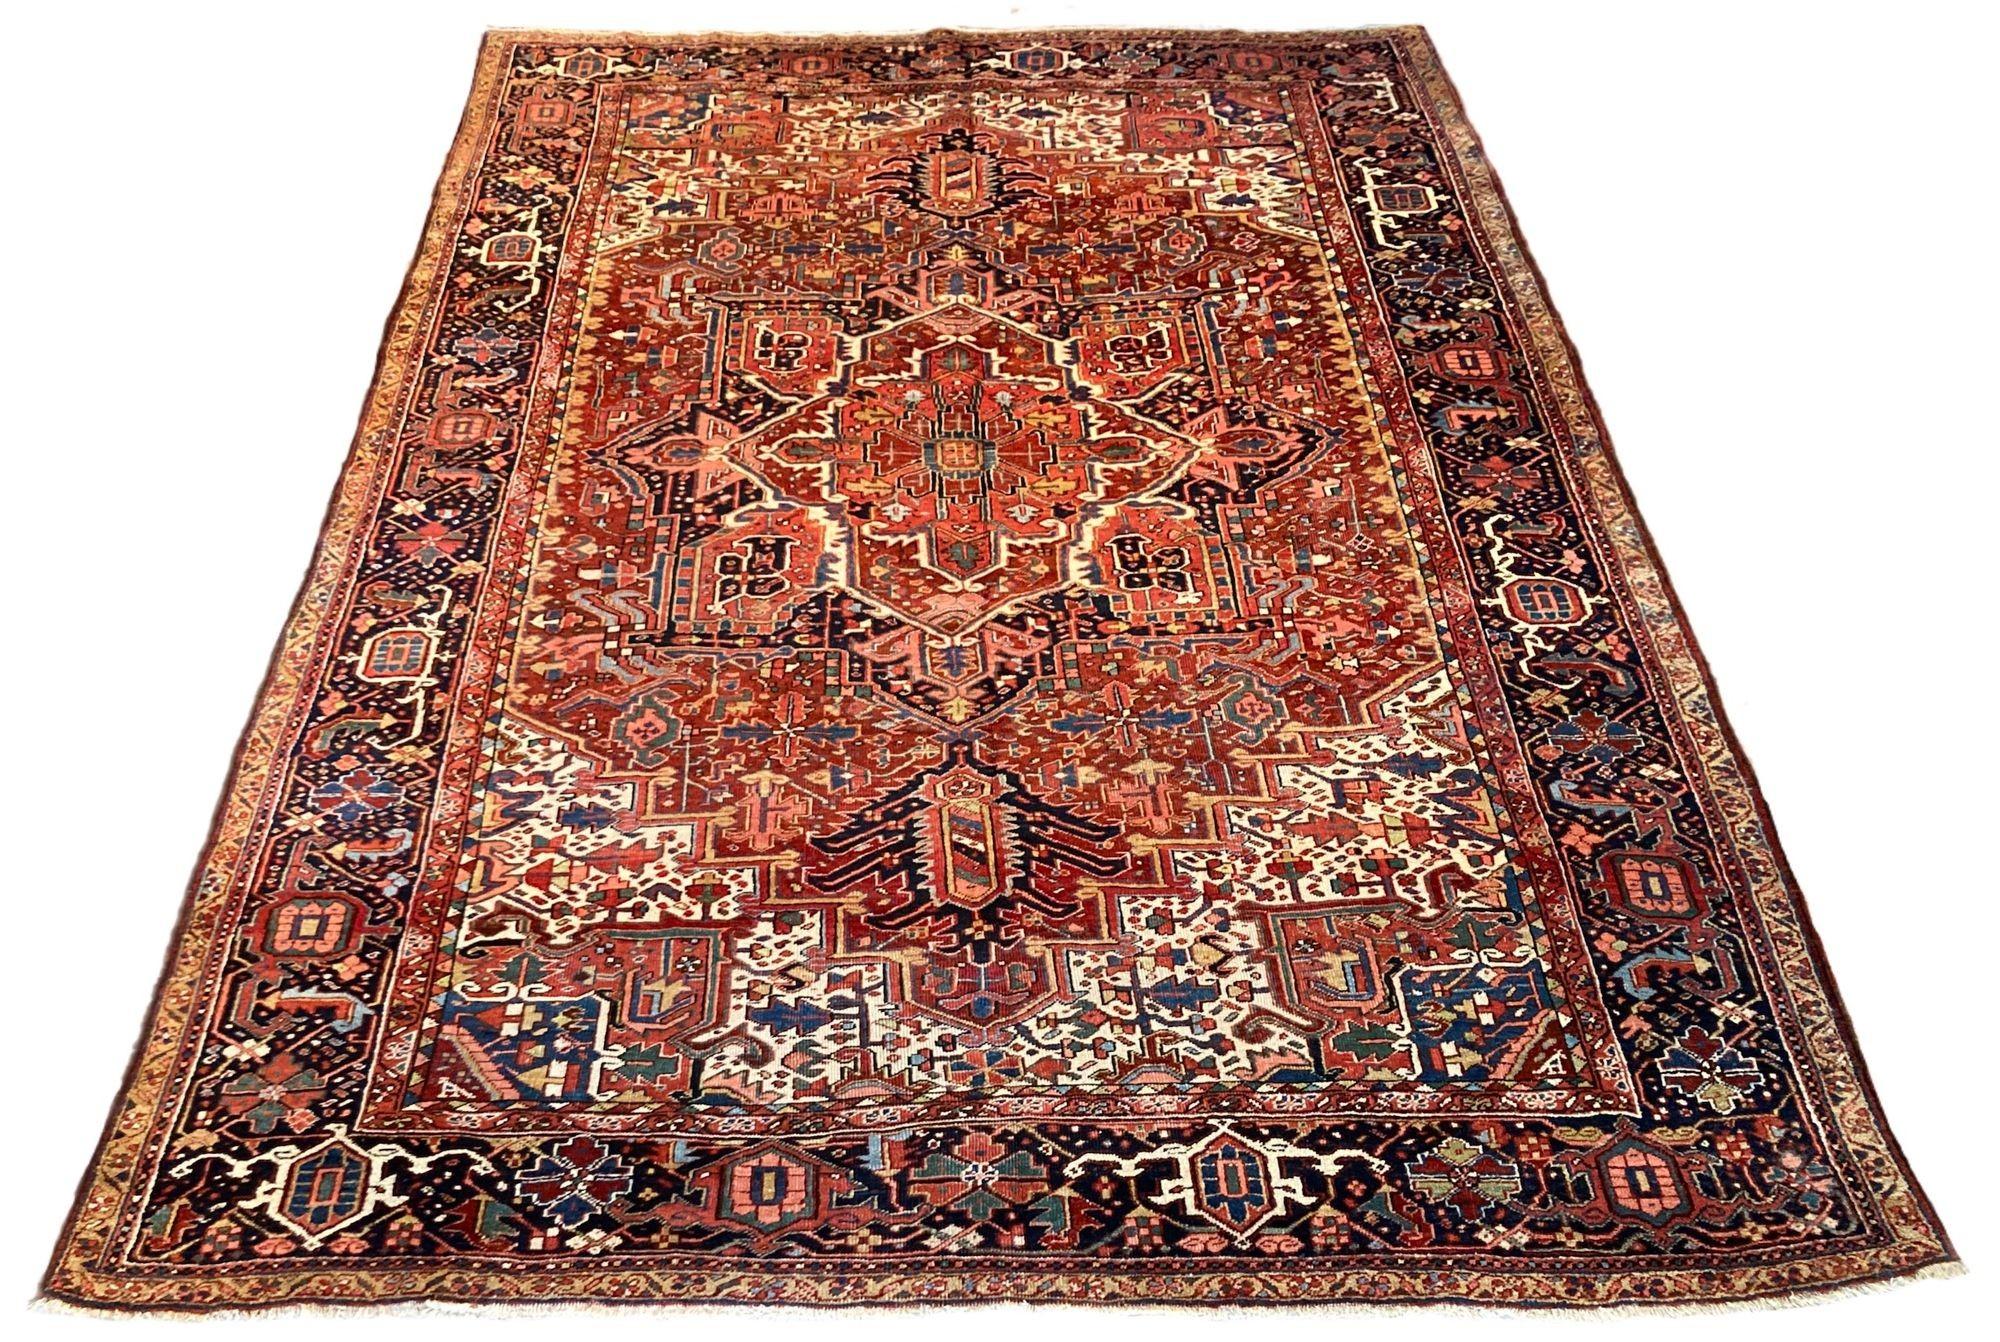 A wonderful antique Heriz carpet, hand woven circa 1920. The design features a large, geometrical central medallion surrounded by stylised flowers and vines on a rich terracotta field. Some interesting design elements include the innermost border of